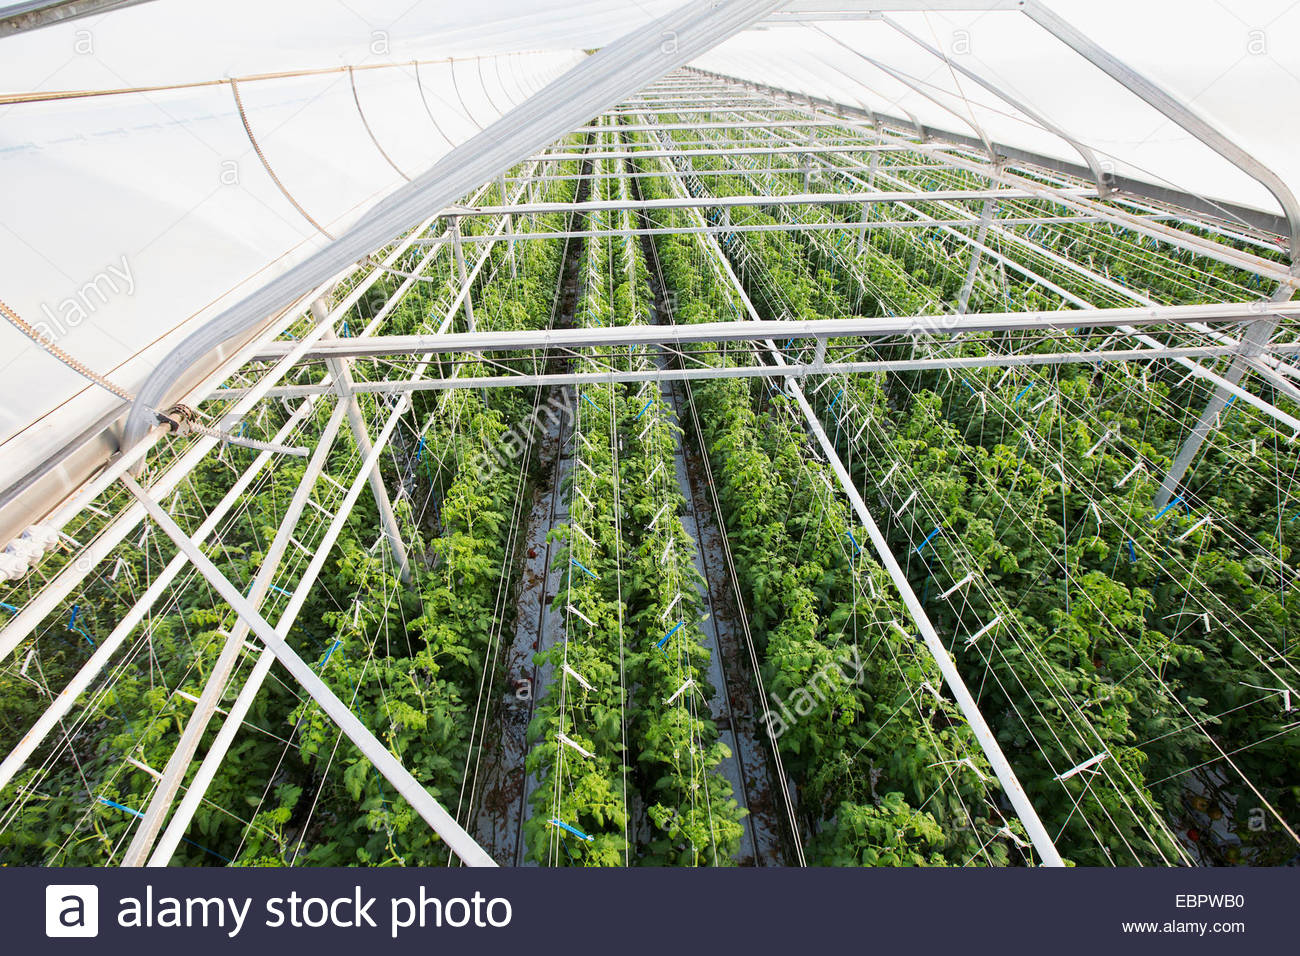 Plants growing in a row in greenhouse Stock Photo